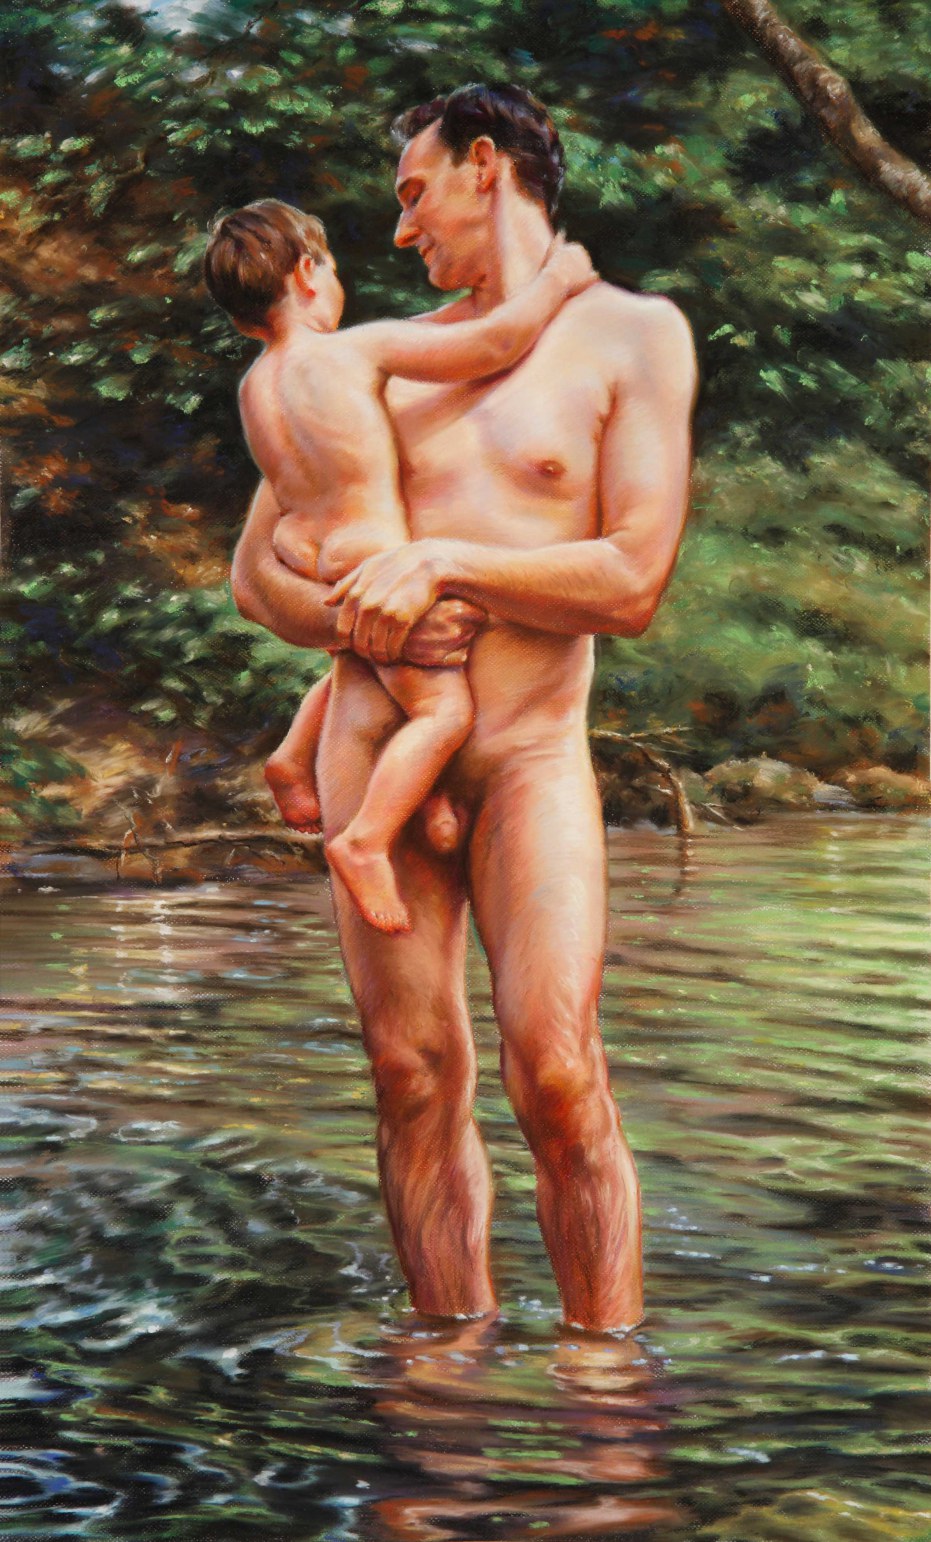 Human Nudity In Its Purest Form In Susannah Martins Paintings 14